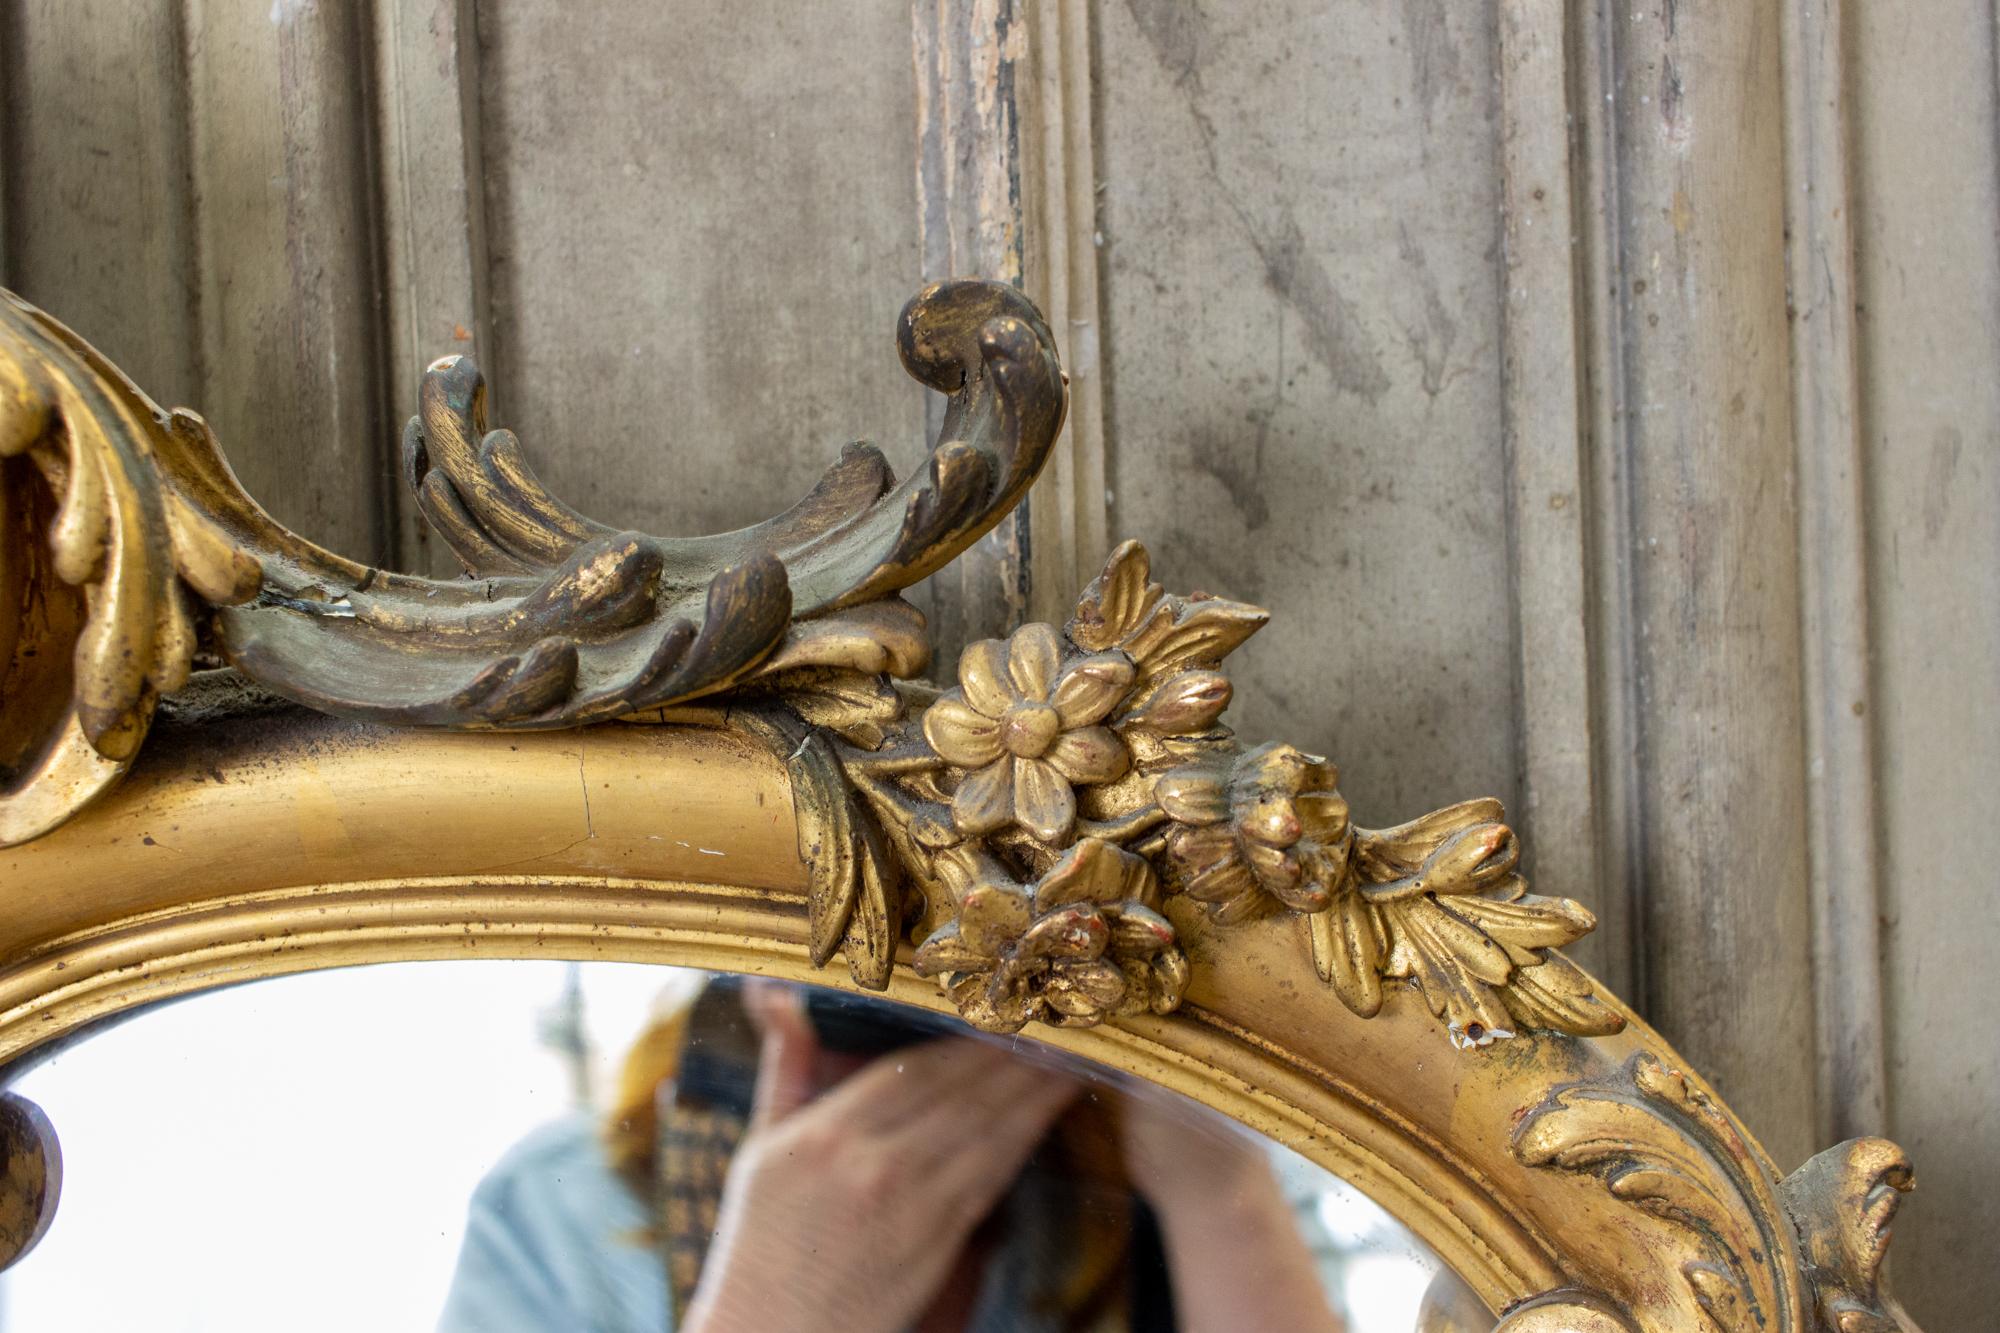 19th Century Antique Gilt Full-Length Mirror with Decorative Carvings and Shell Cartouche